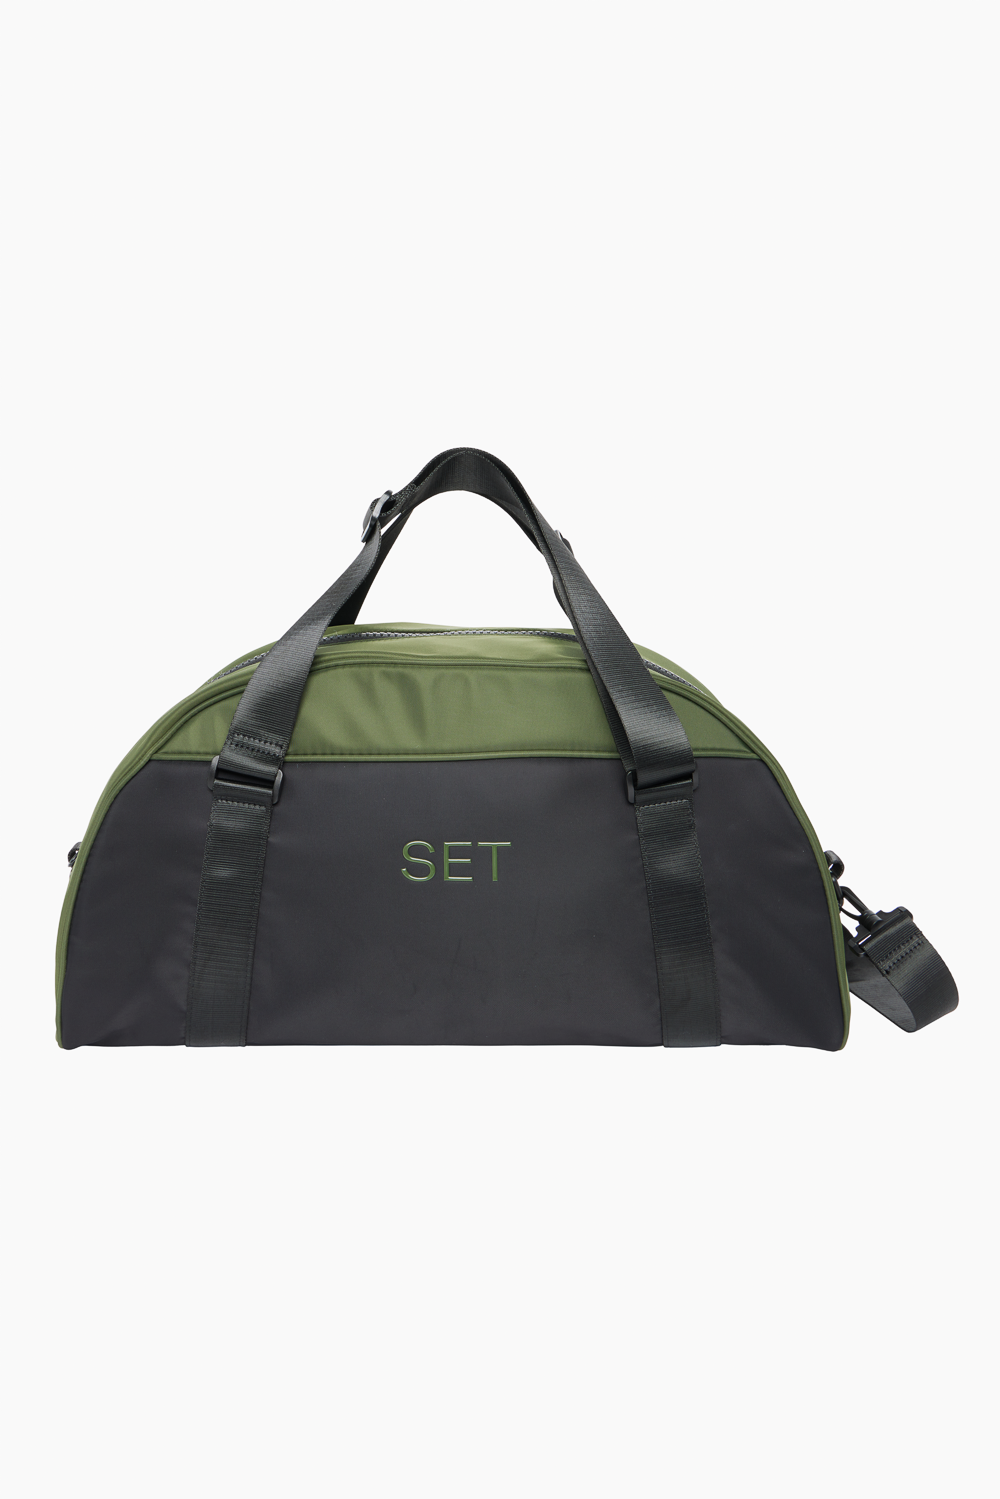 ON-THE-GO DUFFLE - ONYX Featured Image